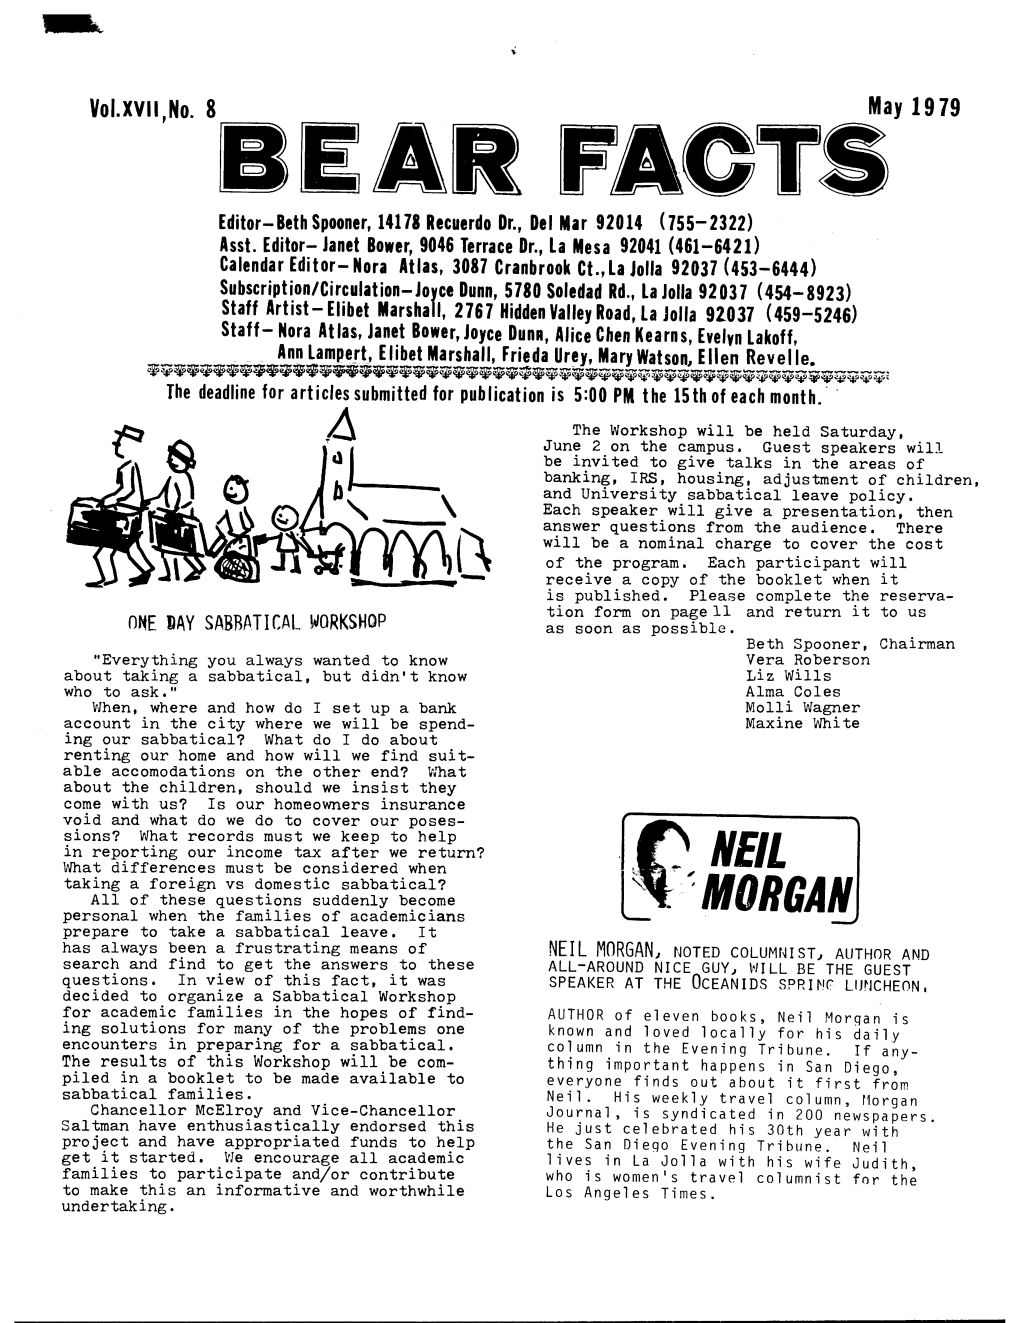 Ear Facts' 1979